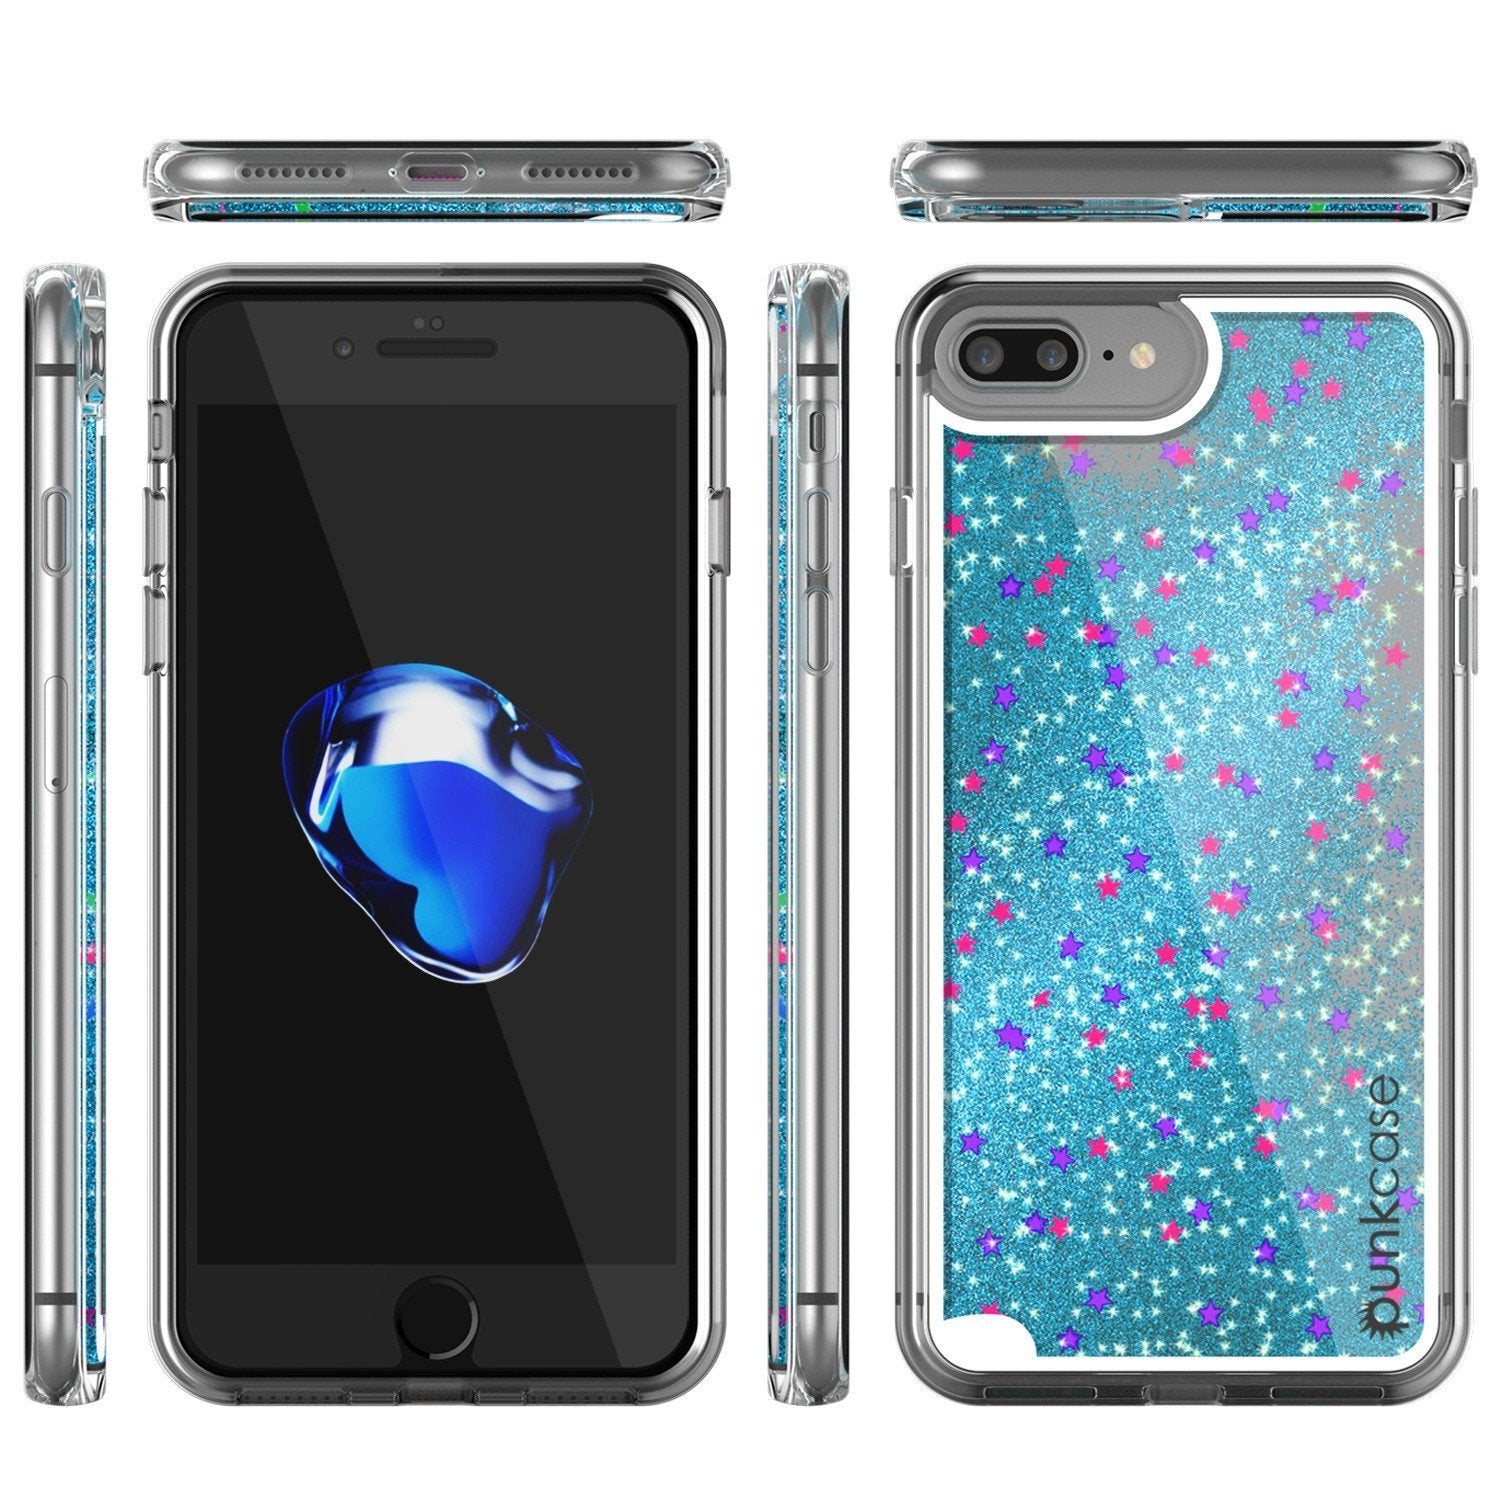 iPhone 8+ Plus Case, PunkCase Liquid Teal Floating Glitter Cover Series